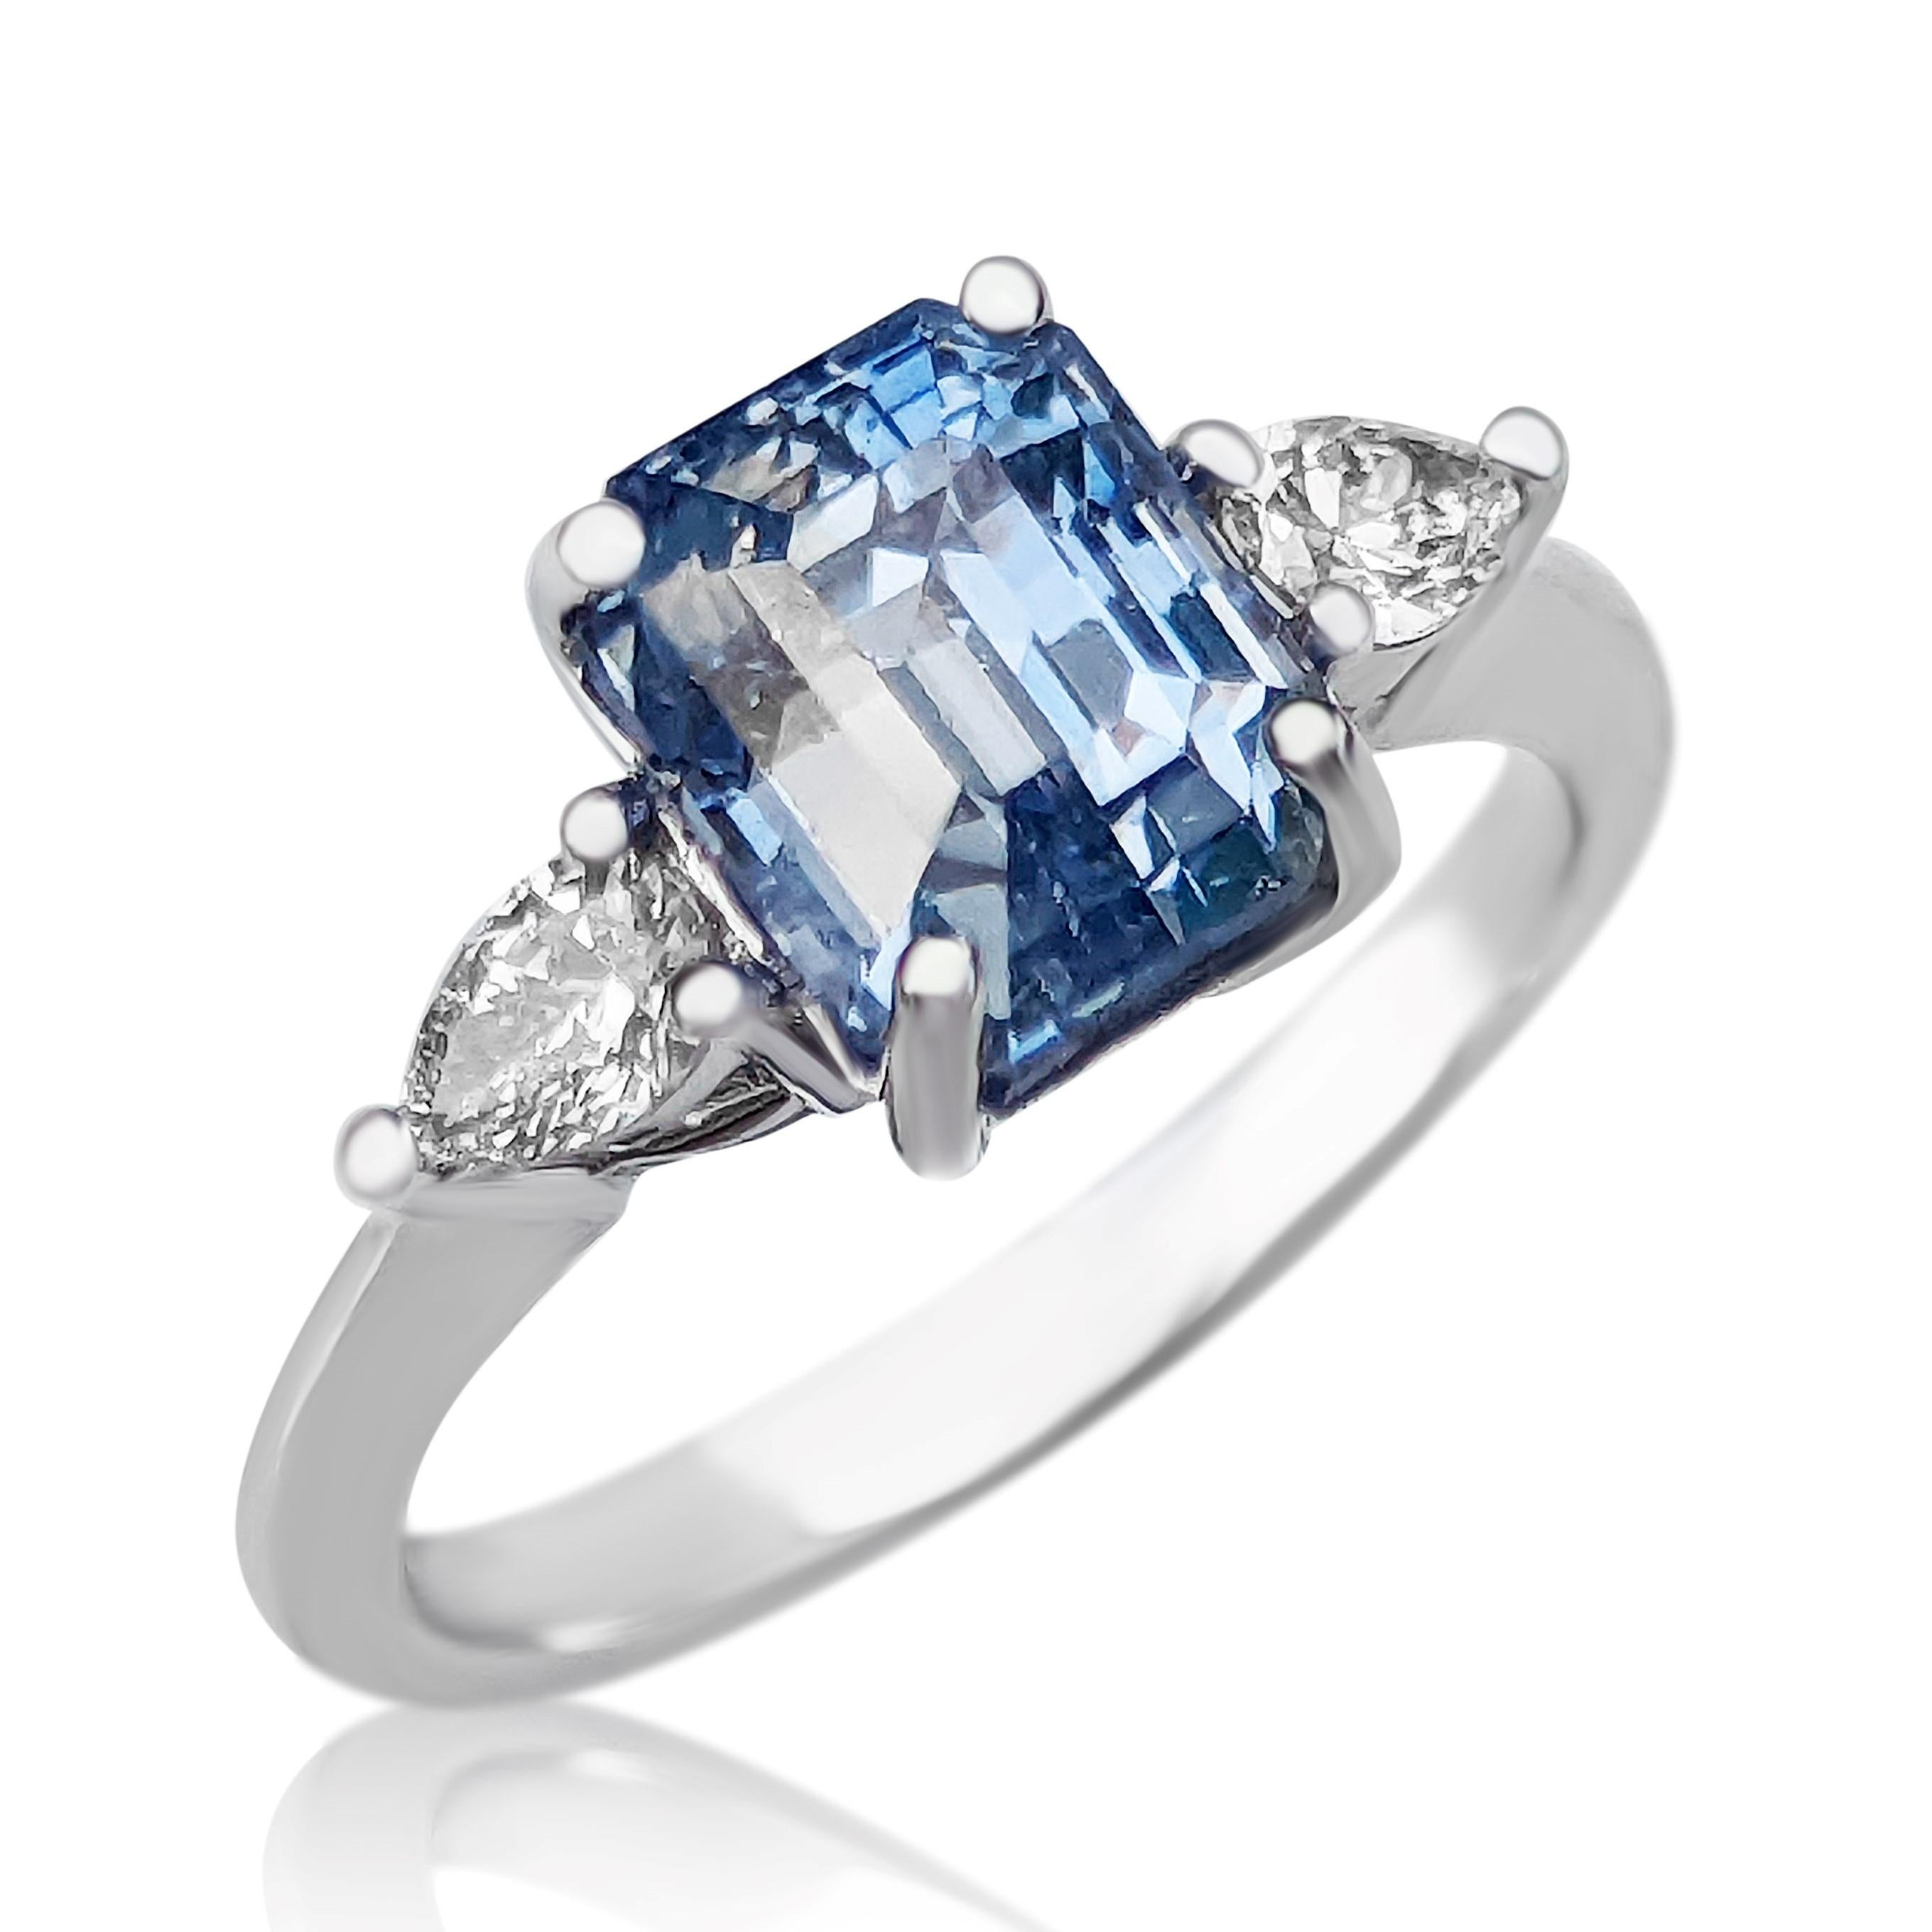 Ring can be sized free of charge prior to shipping out.    

Center Natural Sapphire
Weight: 4.06 ct
Color: Blue
Shape: Emerald Cut

Side Stones:
0.30 cttw D-F VS Natural Diamonds

Item ships from Israeli Diamonds Exchange, customers are responsible